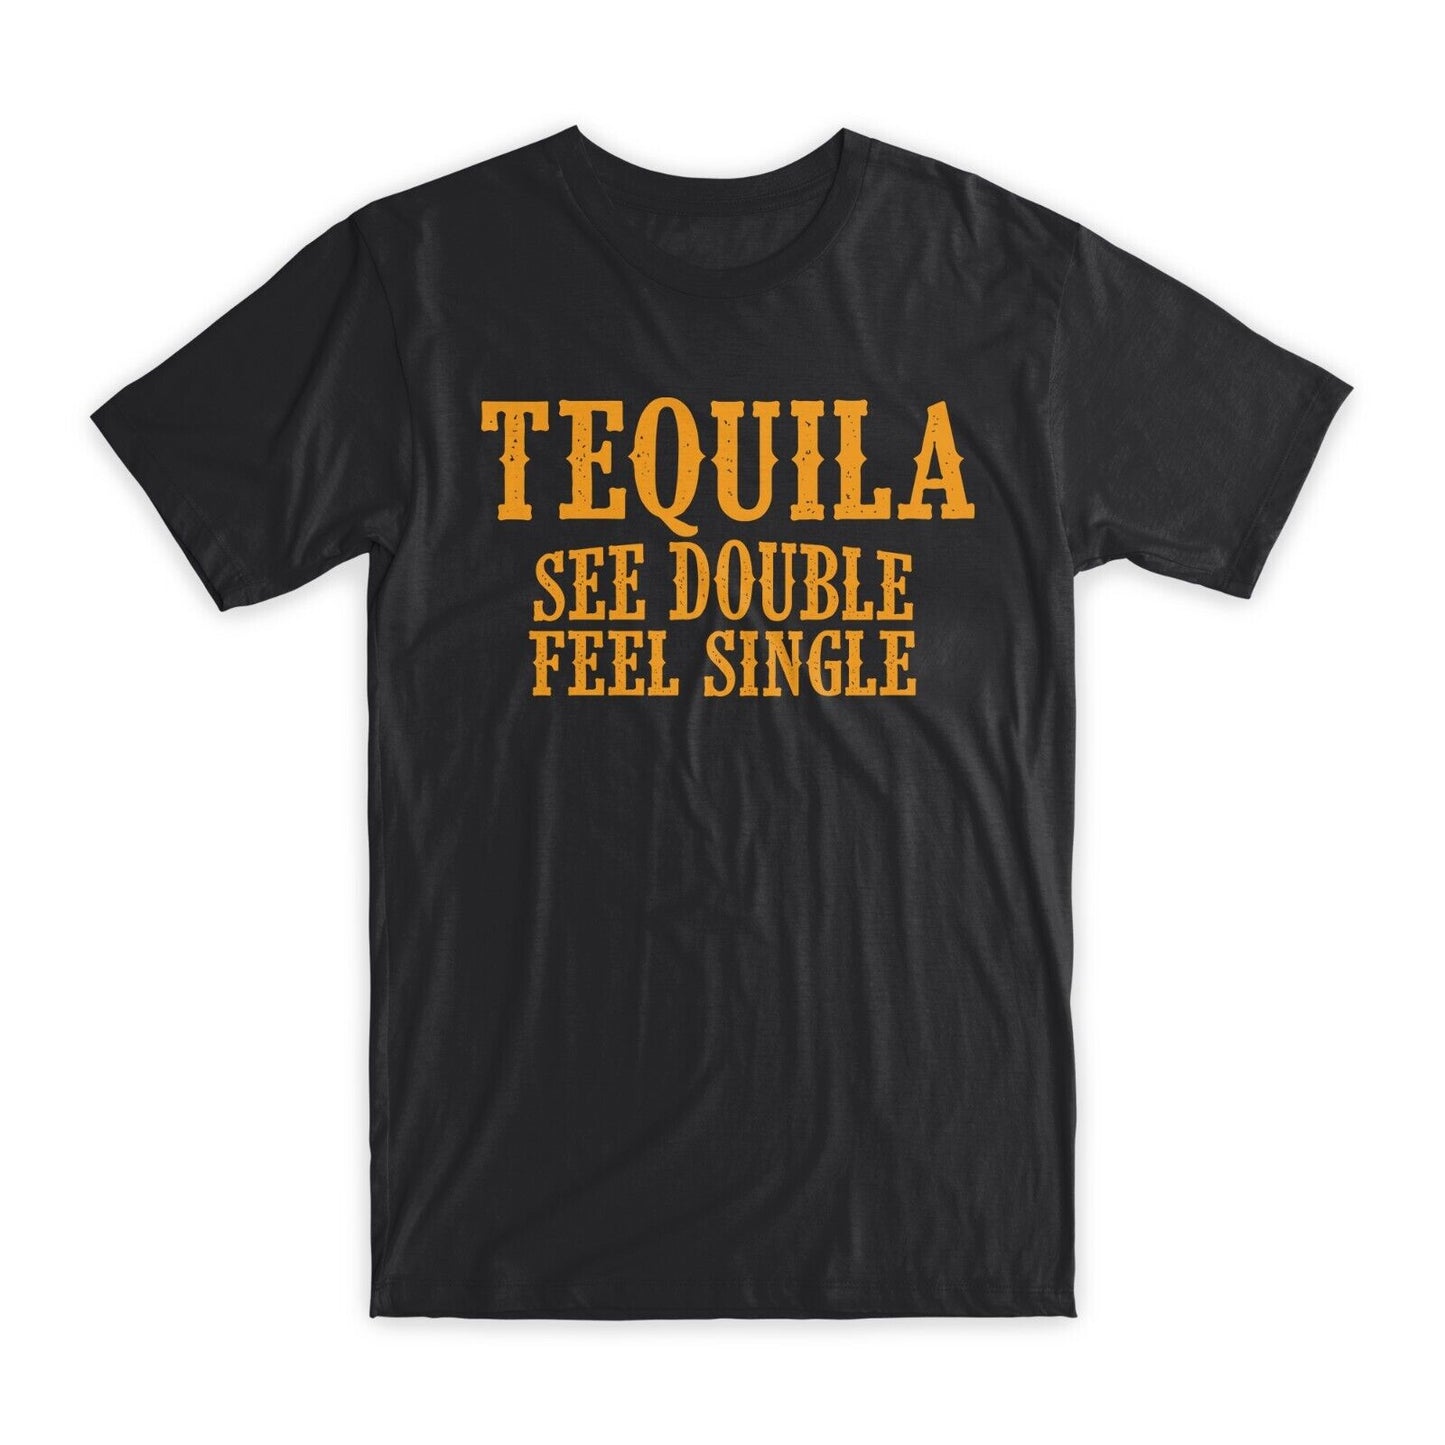 Tequila See Double Feel Single T-Shirt Premium Soft Cotton Funny Tees Gifts NEW